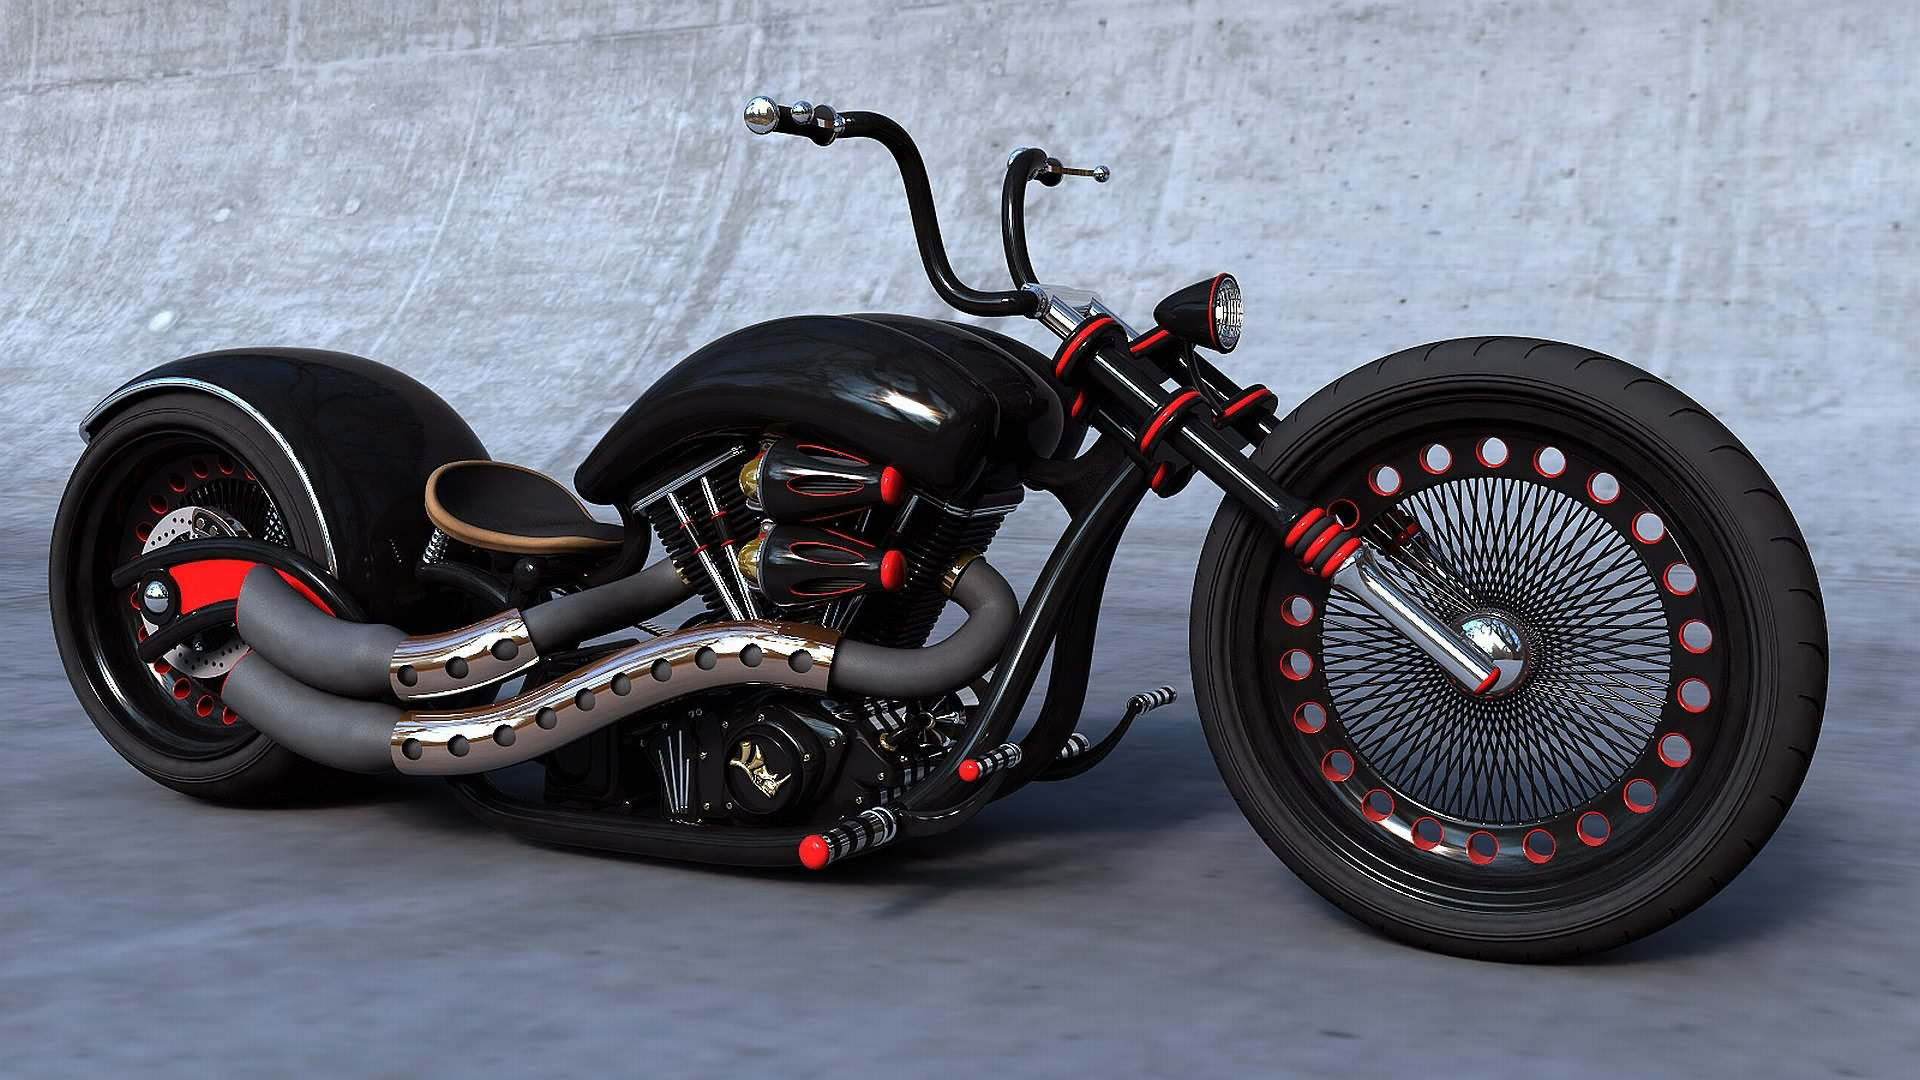 cool chopper wallpaper black motorcycle goodwp motorcycles